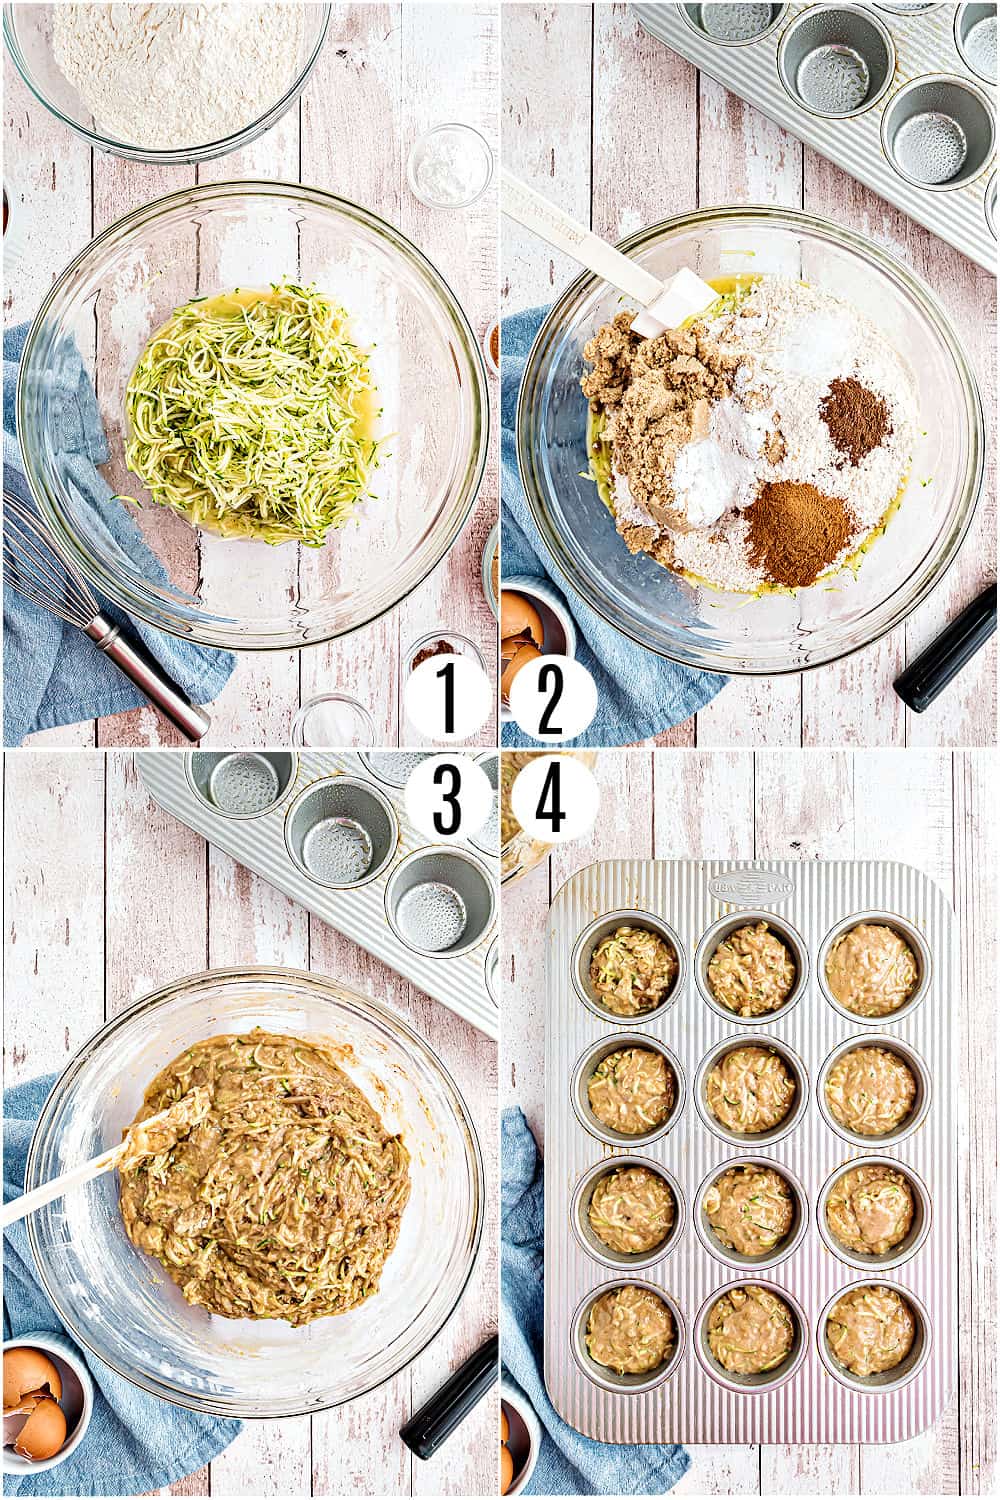 Step by step photos showing how to make zucchini muffins.